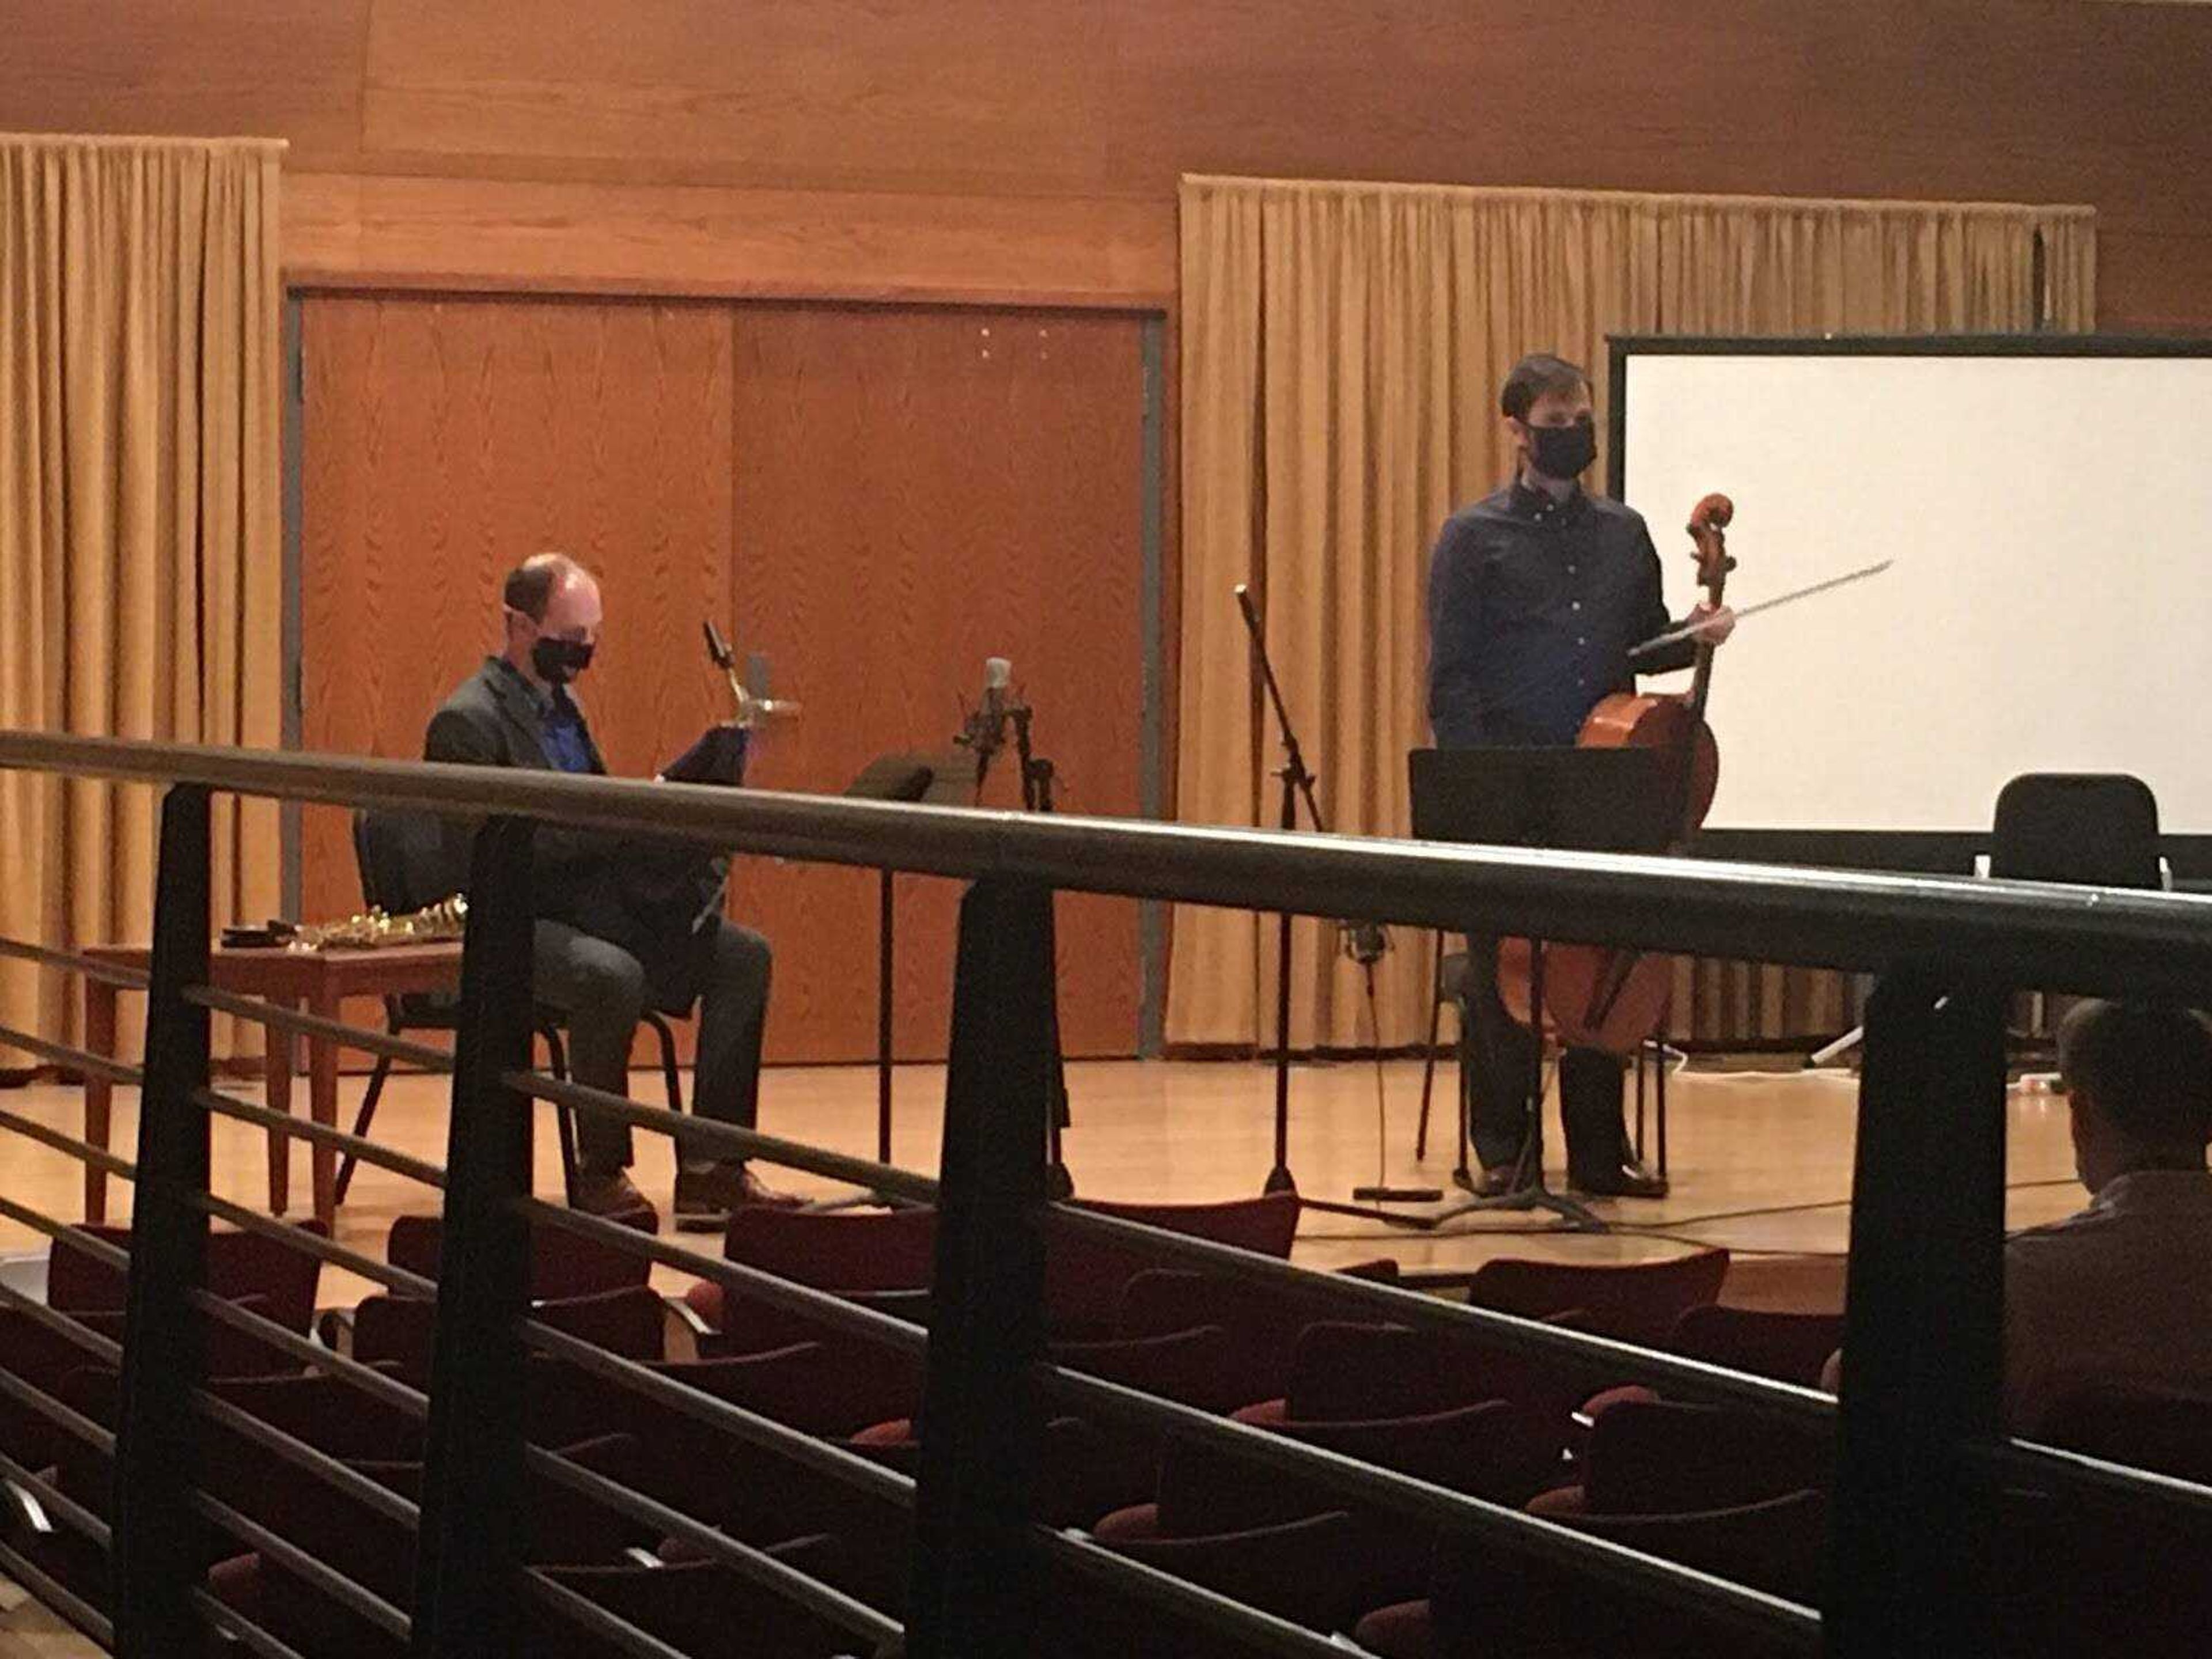 Daniel Ketter (right), one-half of the new cello and saxophone duo Cellax, addresses the crowd after playing their first piece, “Suite Off Pist” by Svante Henryson. Ketter and Zach Stern (left) performed together publicly for the first time Nov. 16 at the River Campus.